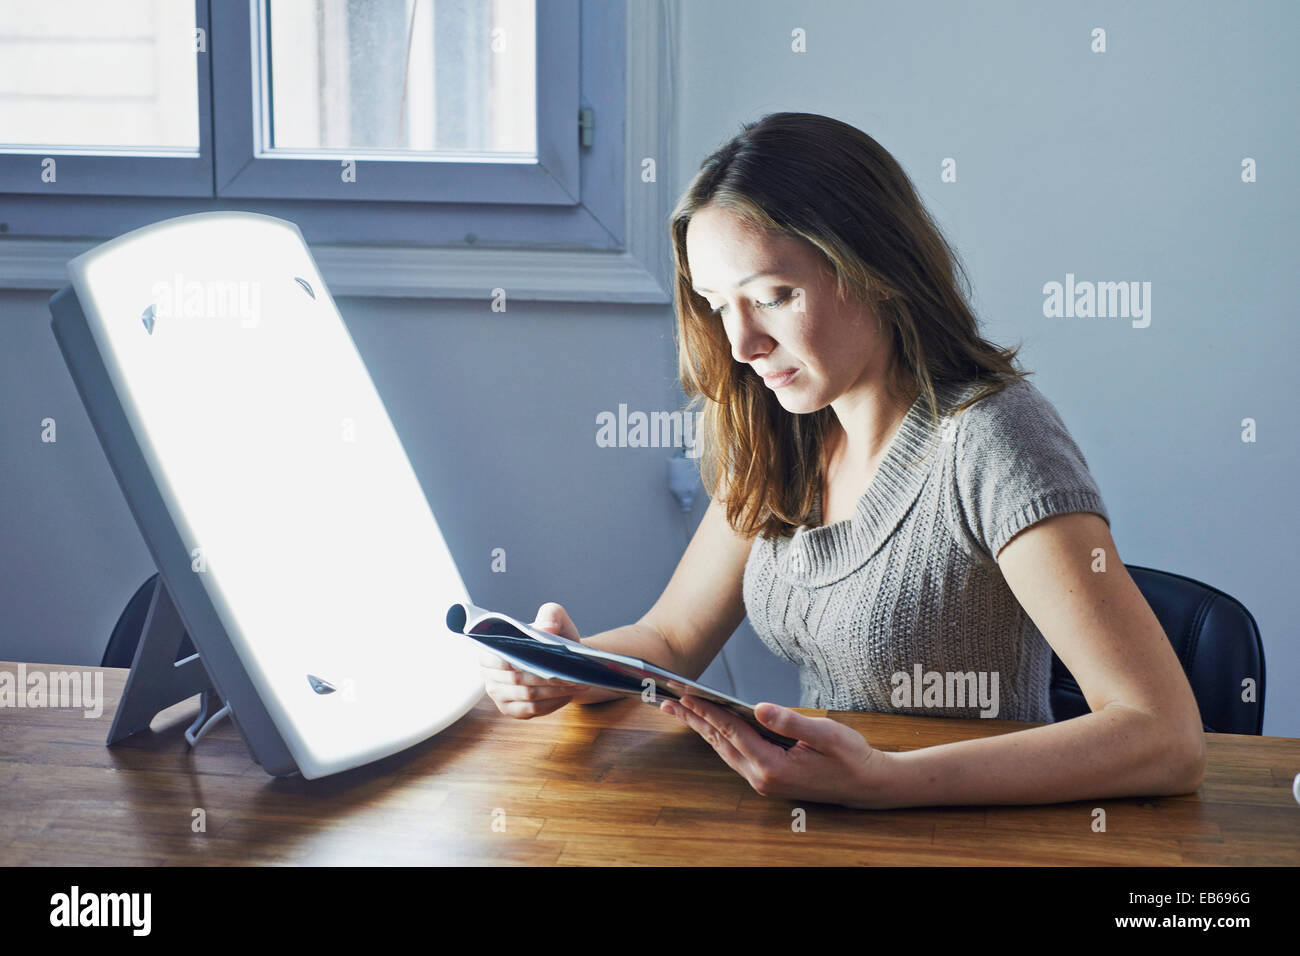 WOMAN LIGHT THERAPY Stock Photo